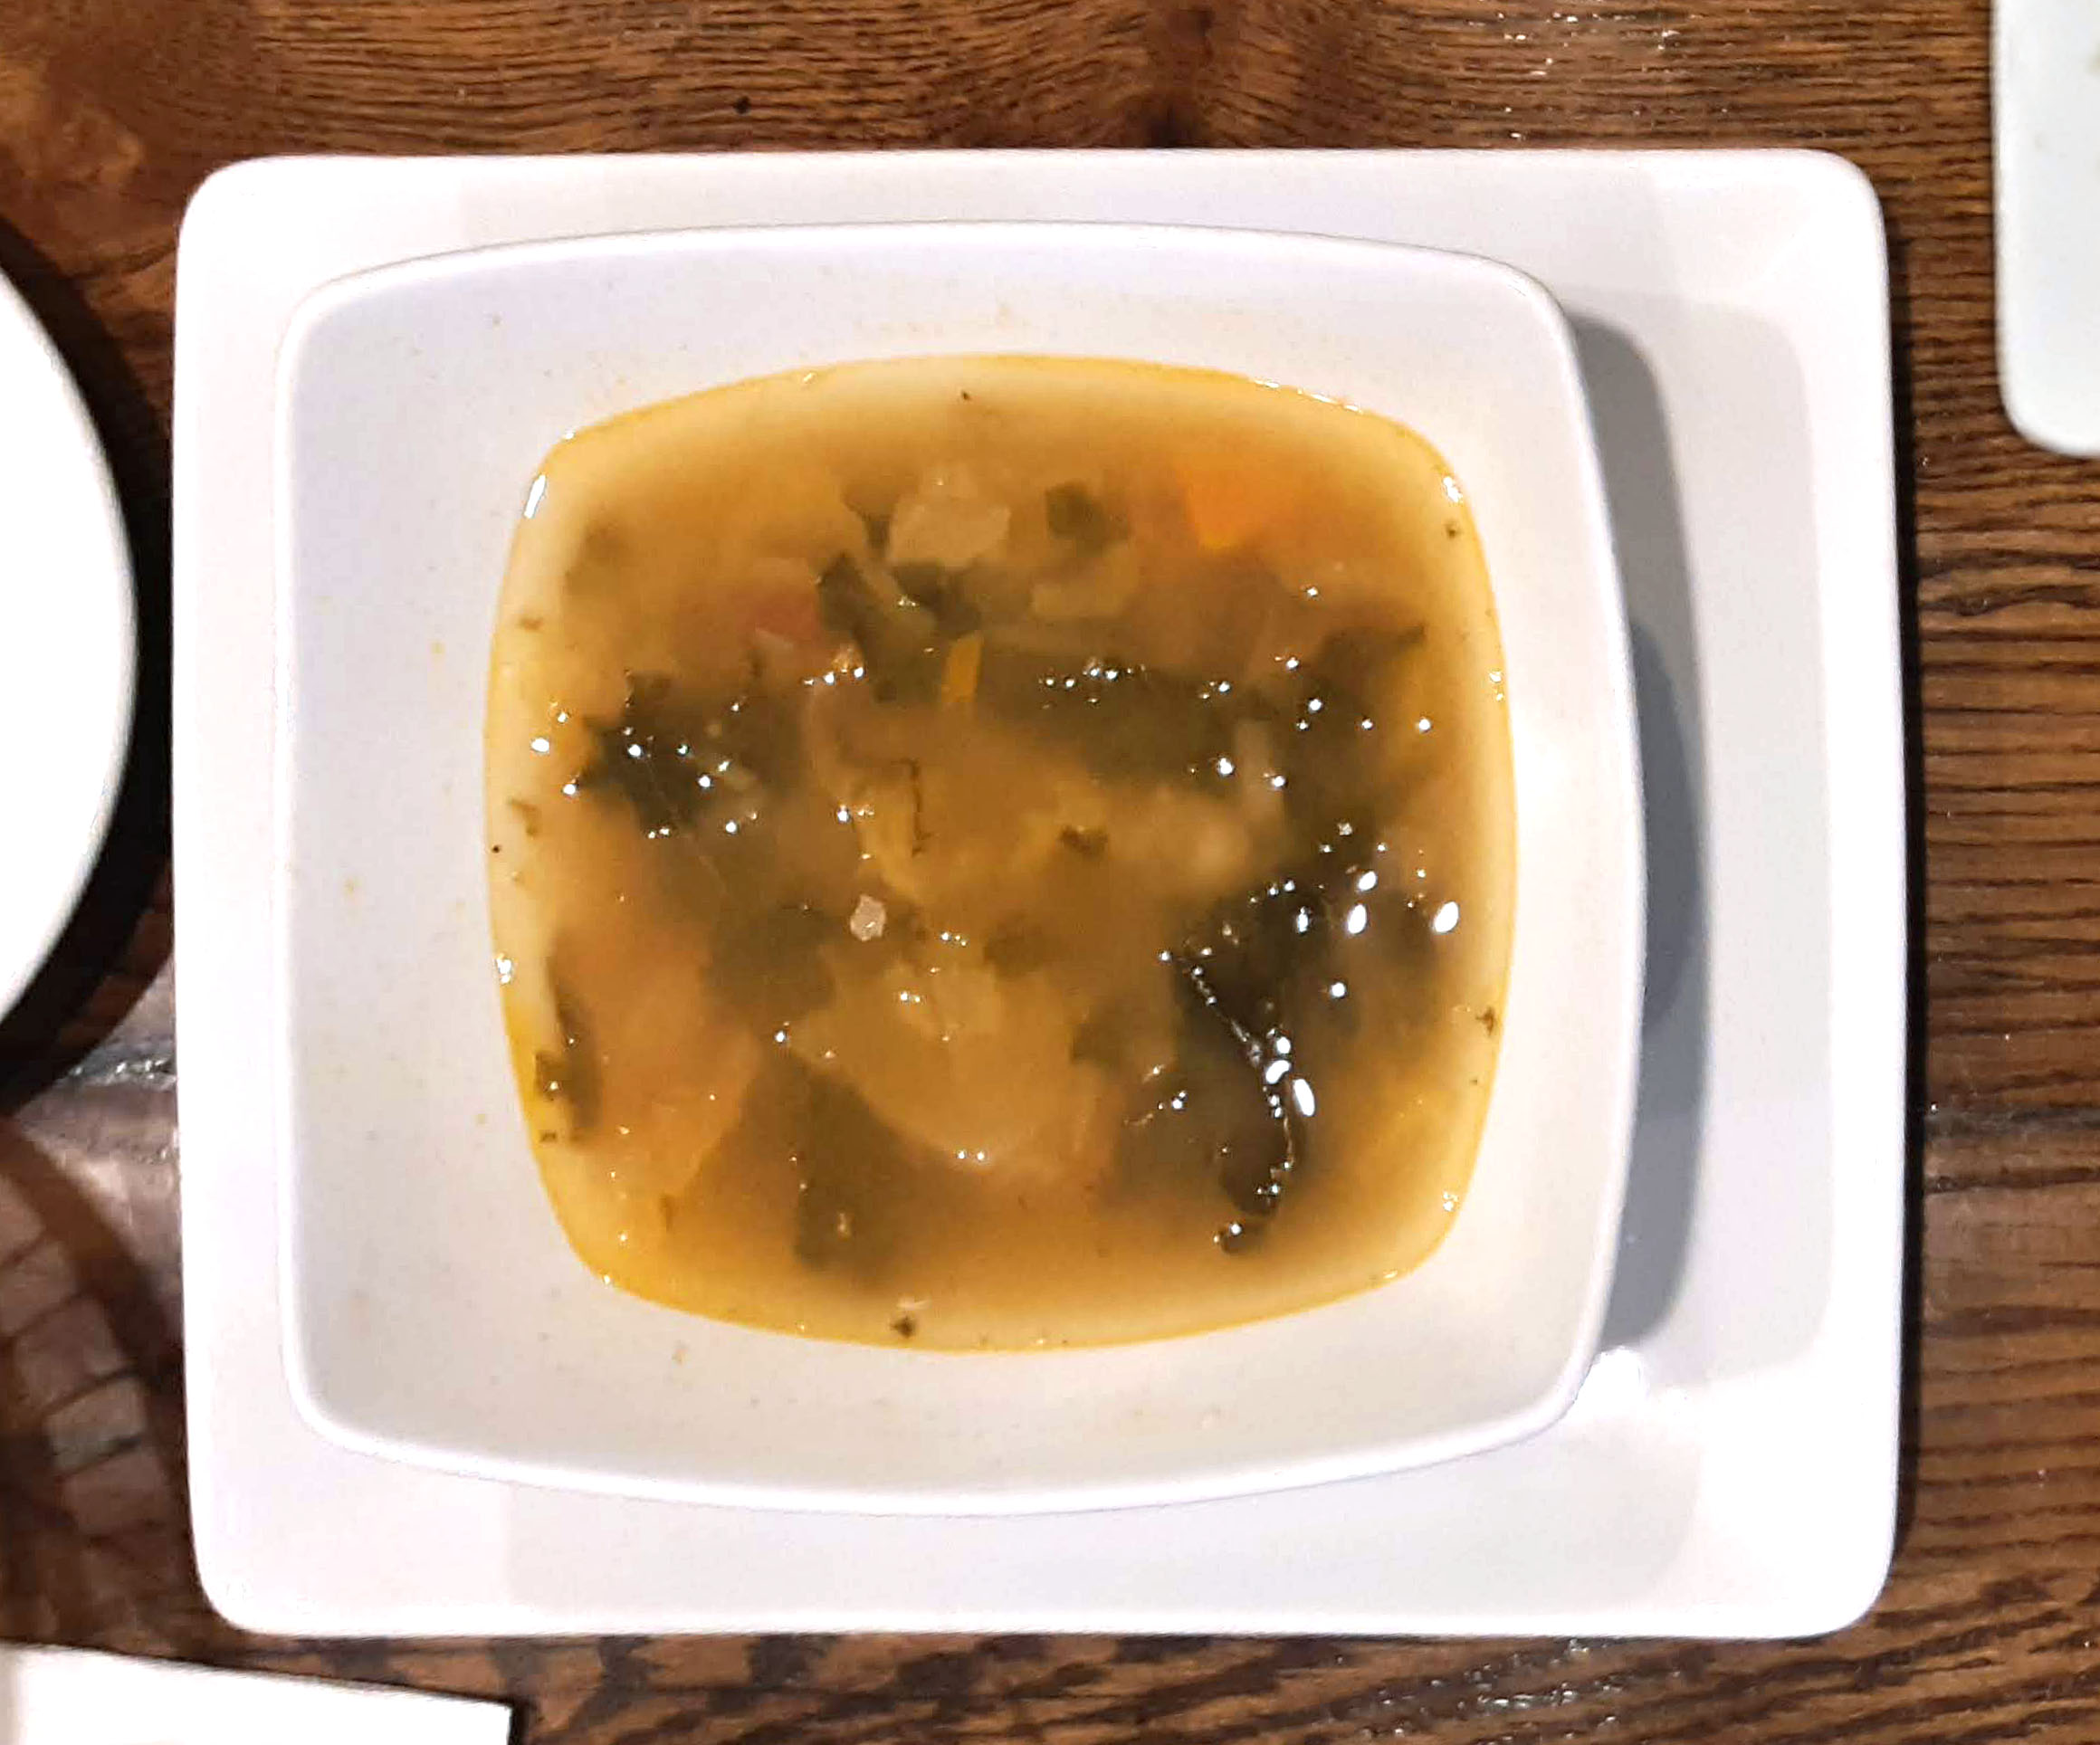 On a large square plate, there is a smaller square bowl with a dark brown cloudy minestrone soup. Photo by Paul Young.